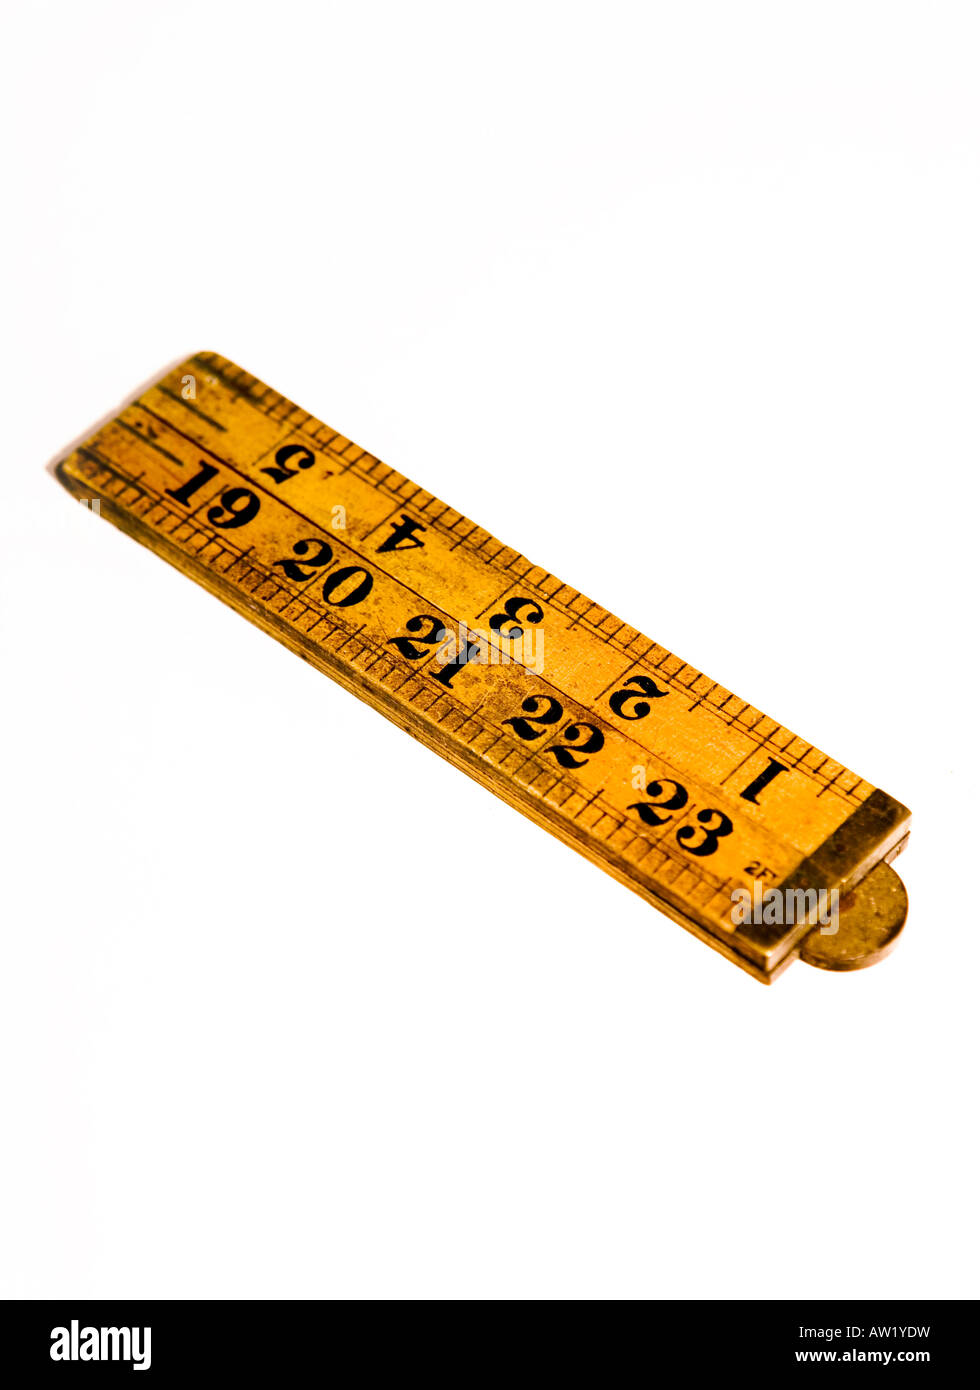 https://c8.alamy.com/comp/AW1YDW/vintage-wooden-ruler-against-a-white-background-AW1YDW.jpg